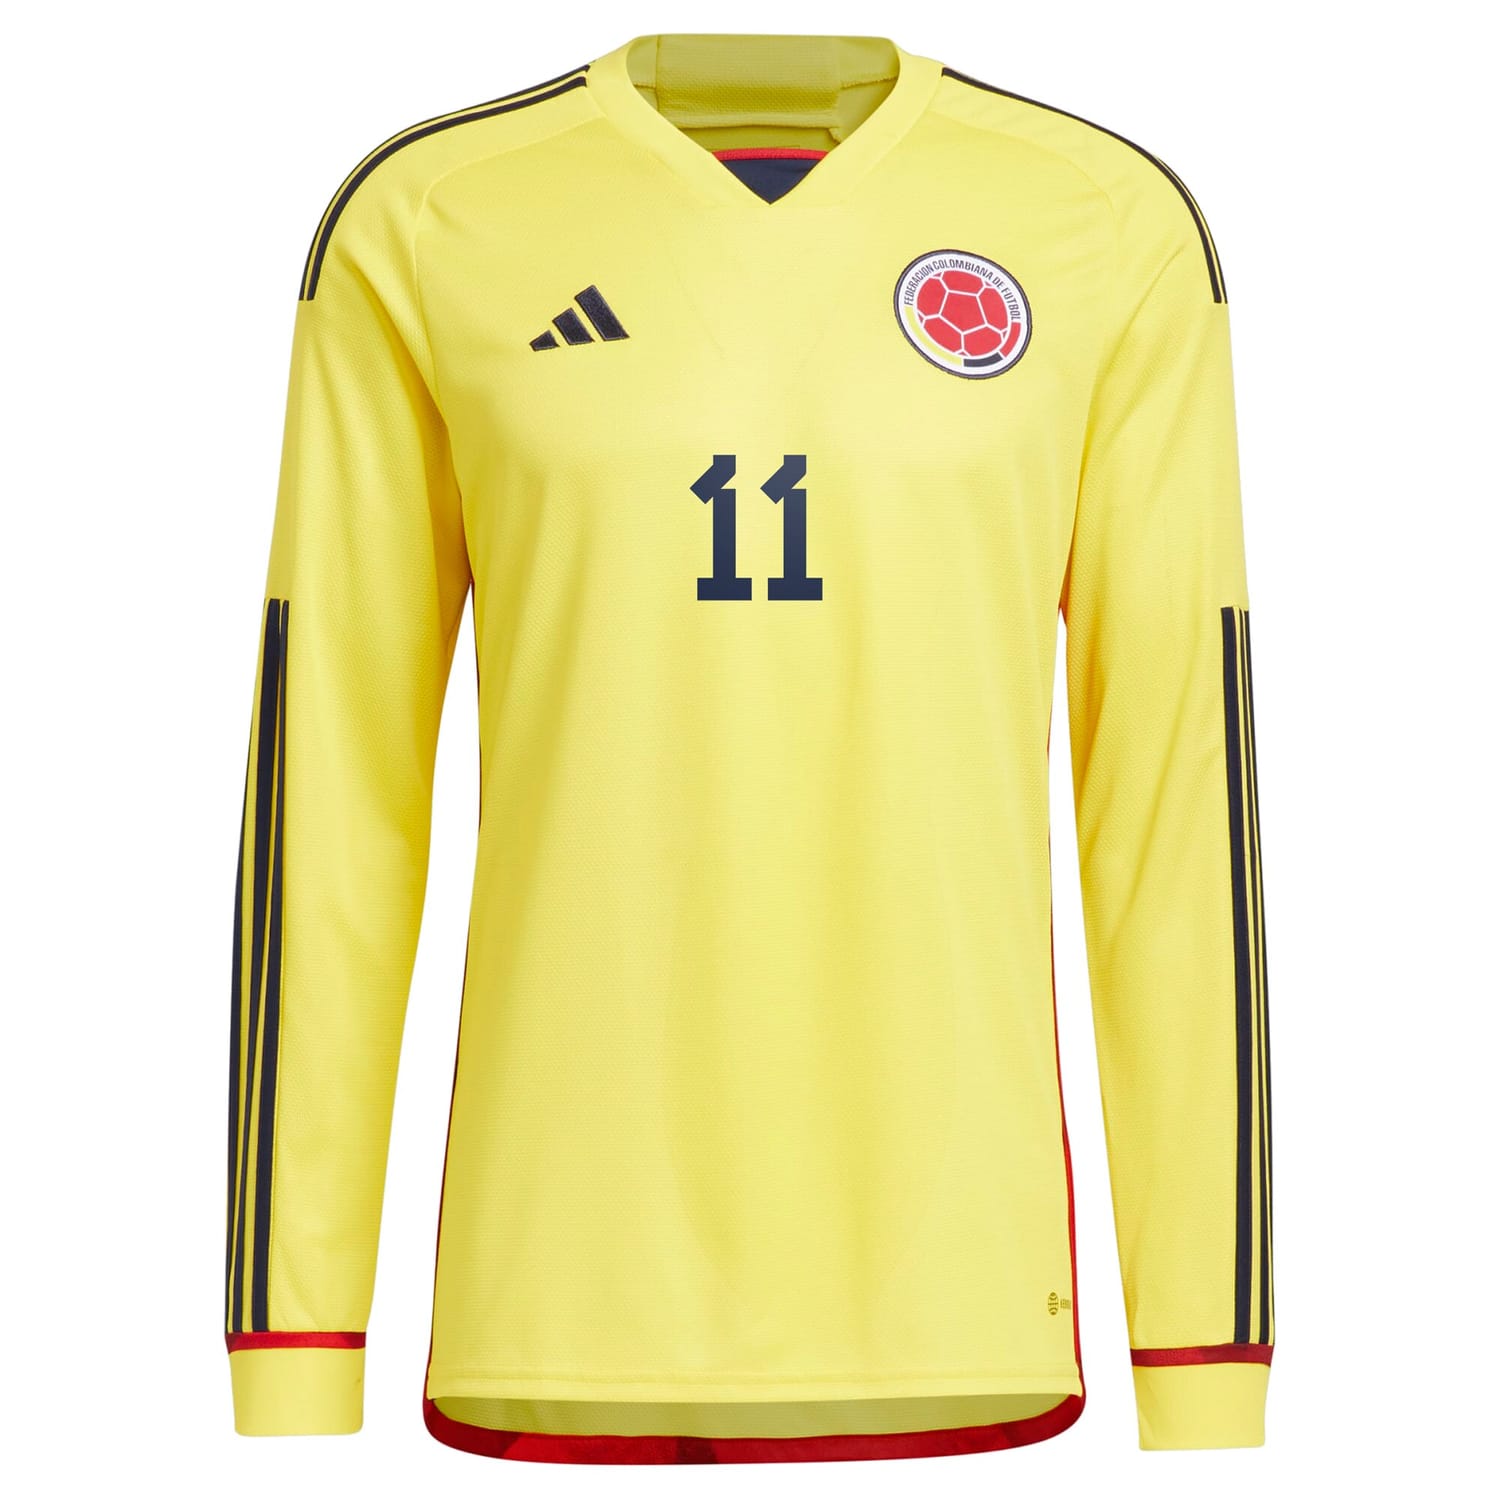 Colombia National Team Home Jersey Shirt Long Sleeve Yellow 2022-23 player Juan Cuadrado printing for Men